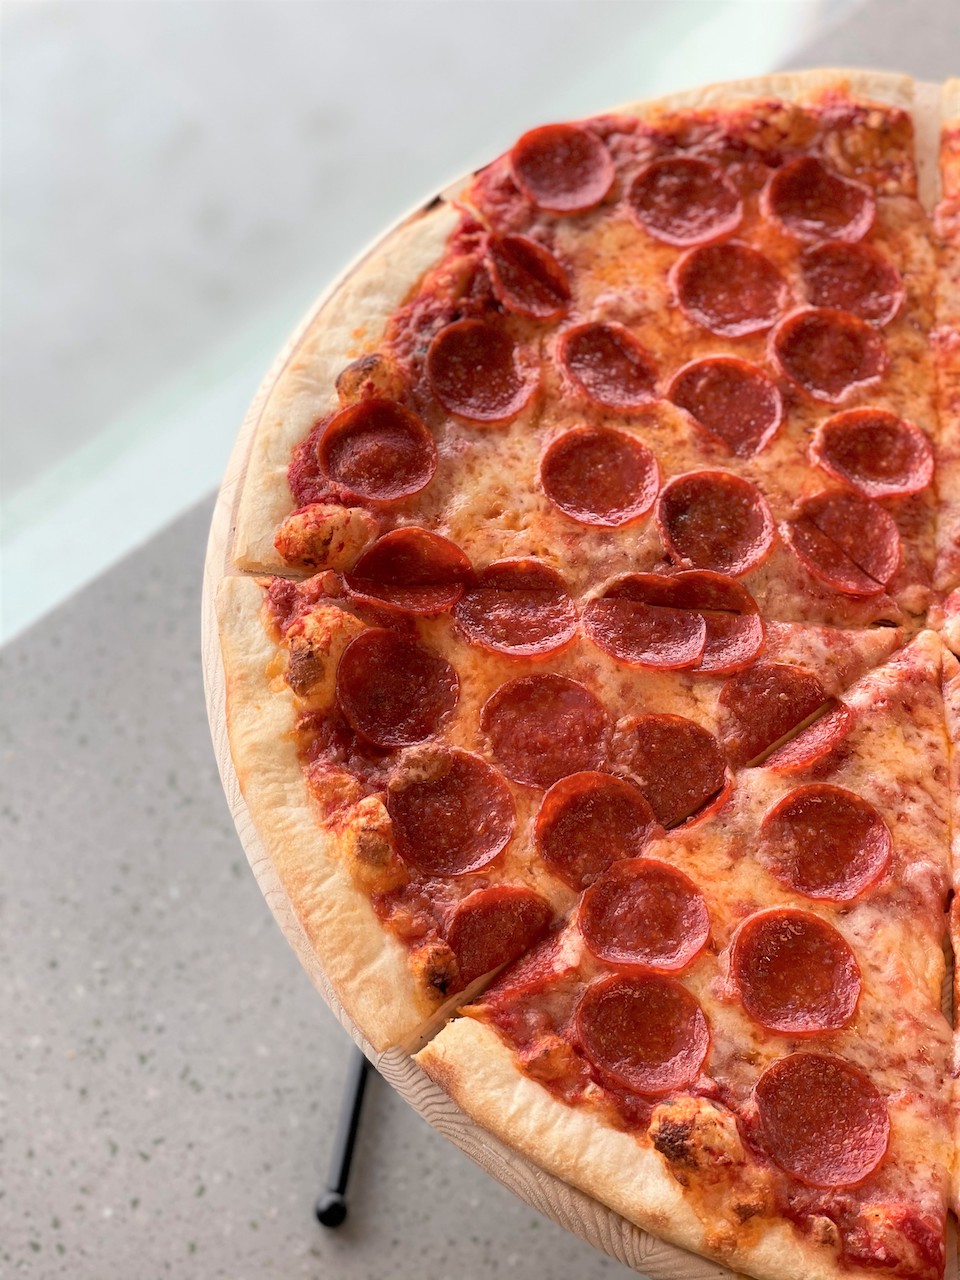 Pepperoni Pizza Day Deal You Won't Want To Miss This Deal!